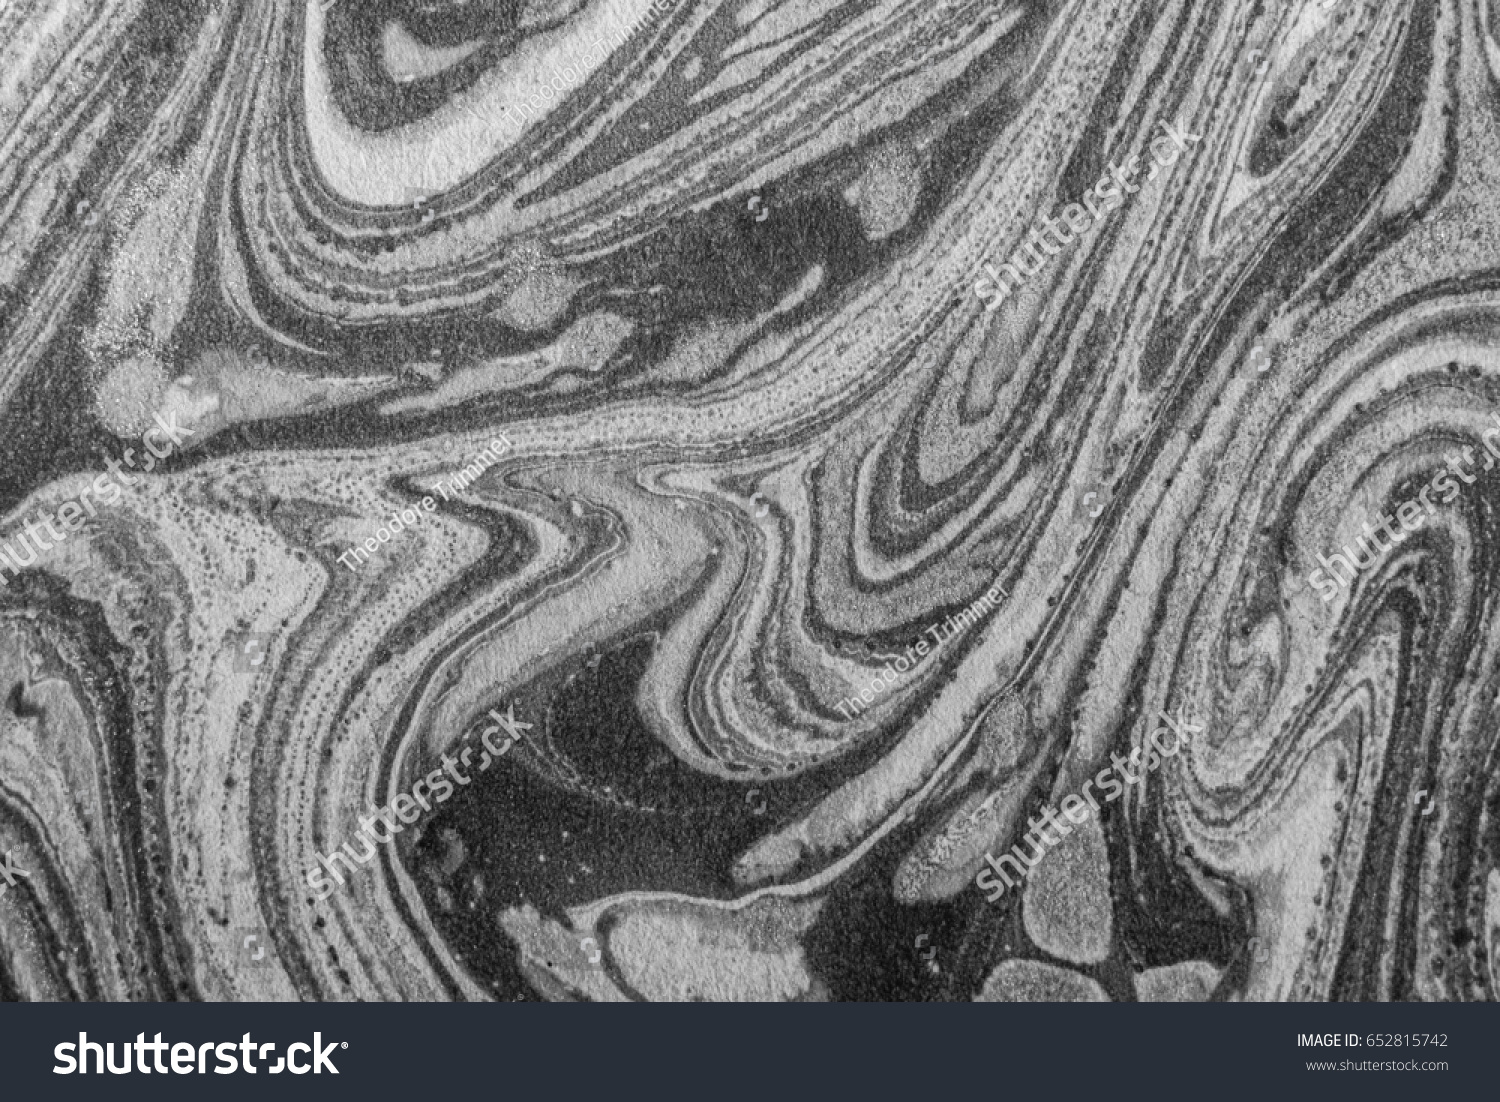 Swirled Paint on Cement Sidewalk.  Black and white photograph of layers of paint. #652815742